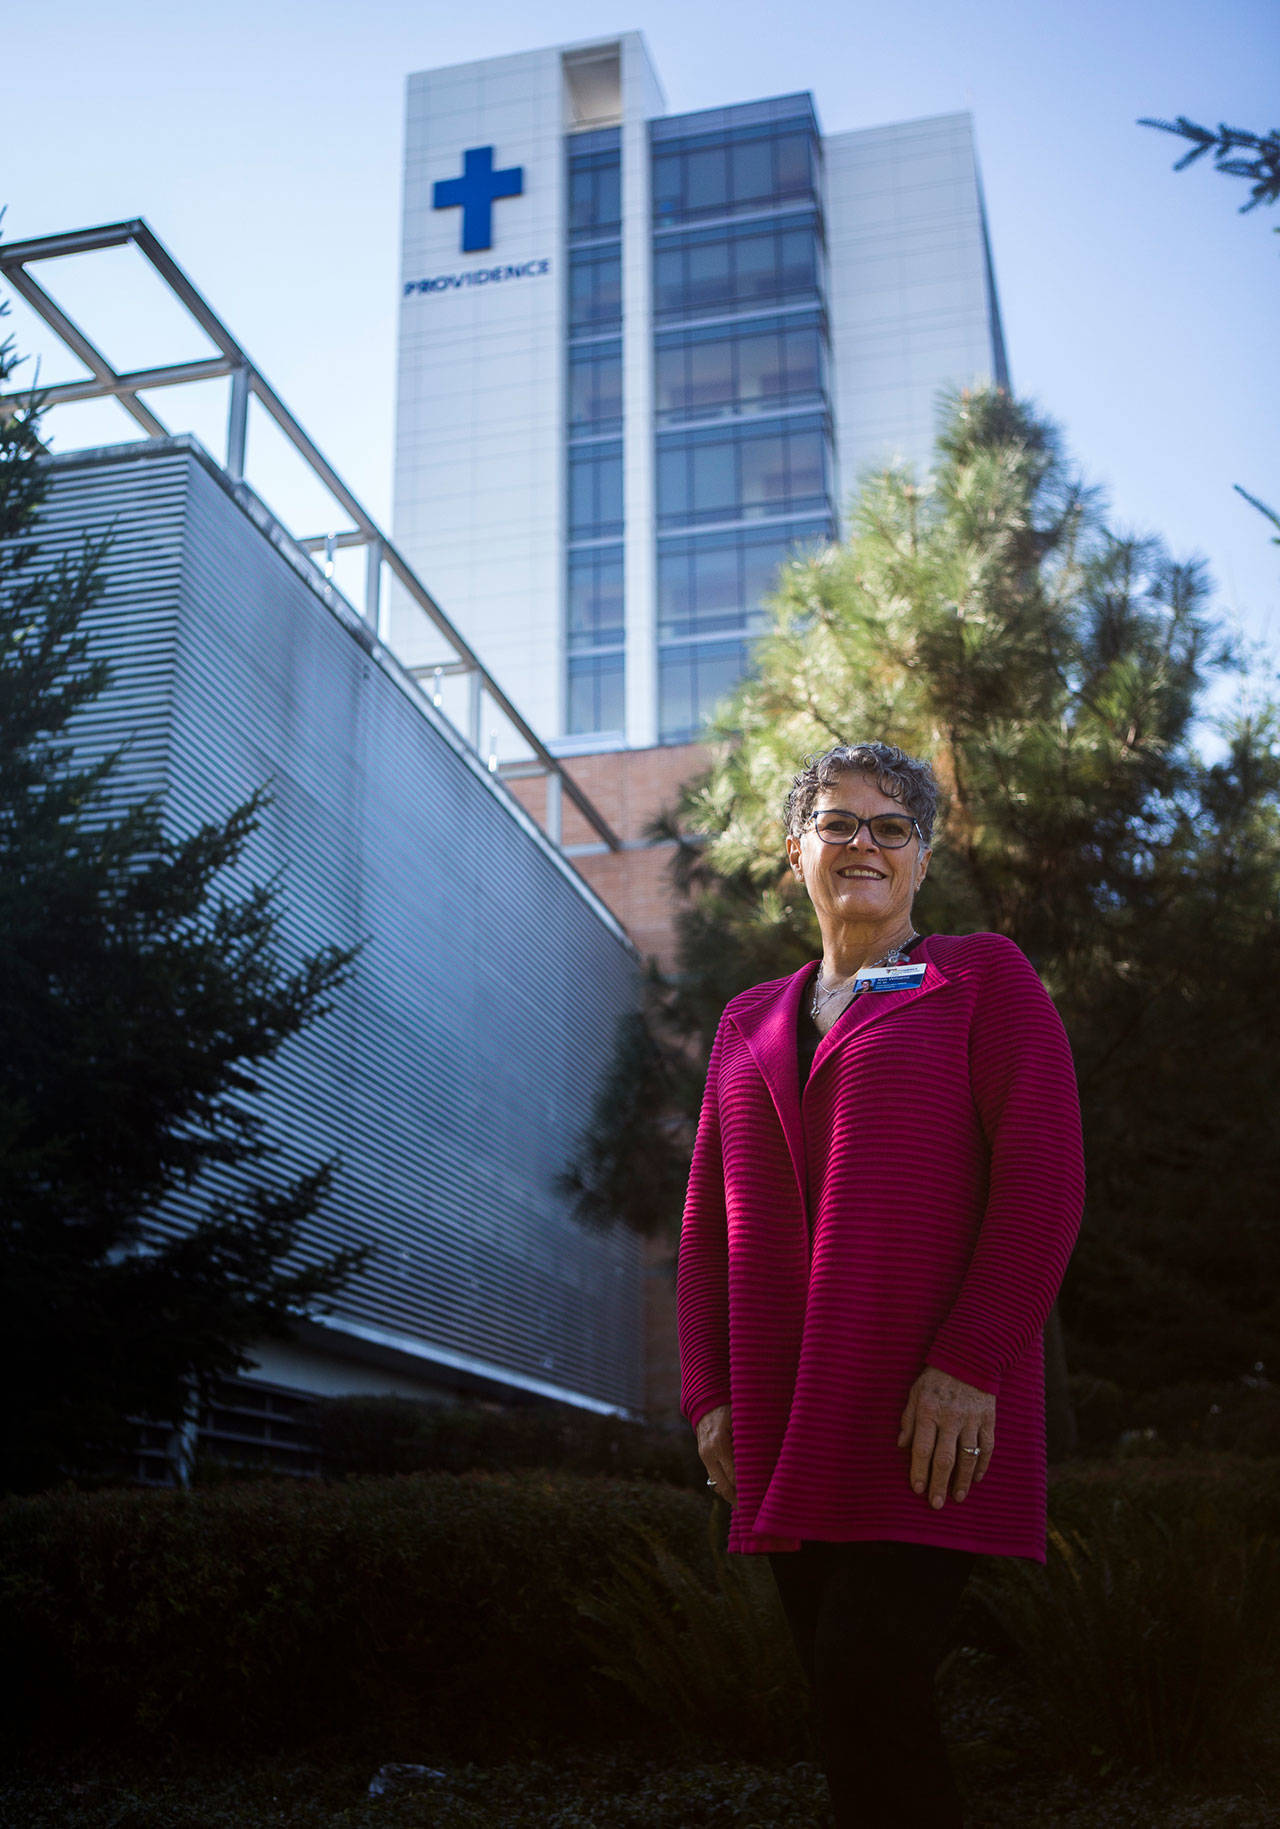 Chief Executive Officer at Providence Health & Services Northwest Kim Williams. (Olivia Vanni / The Herald)